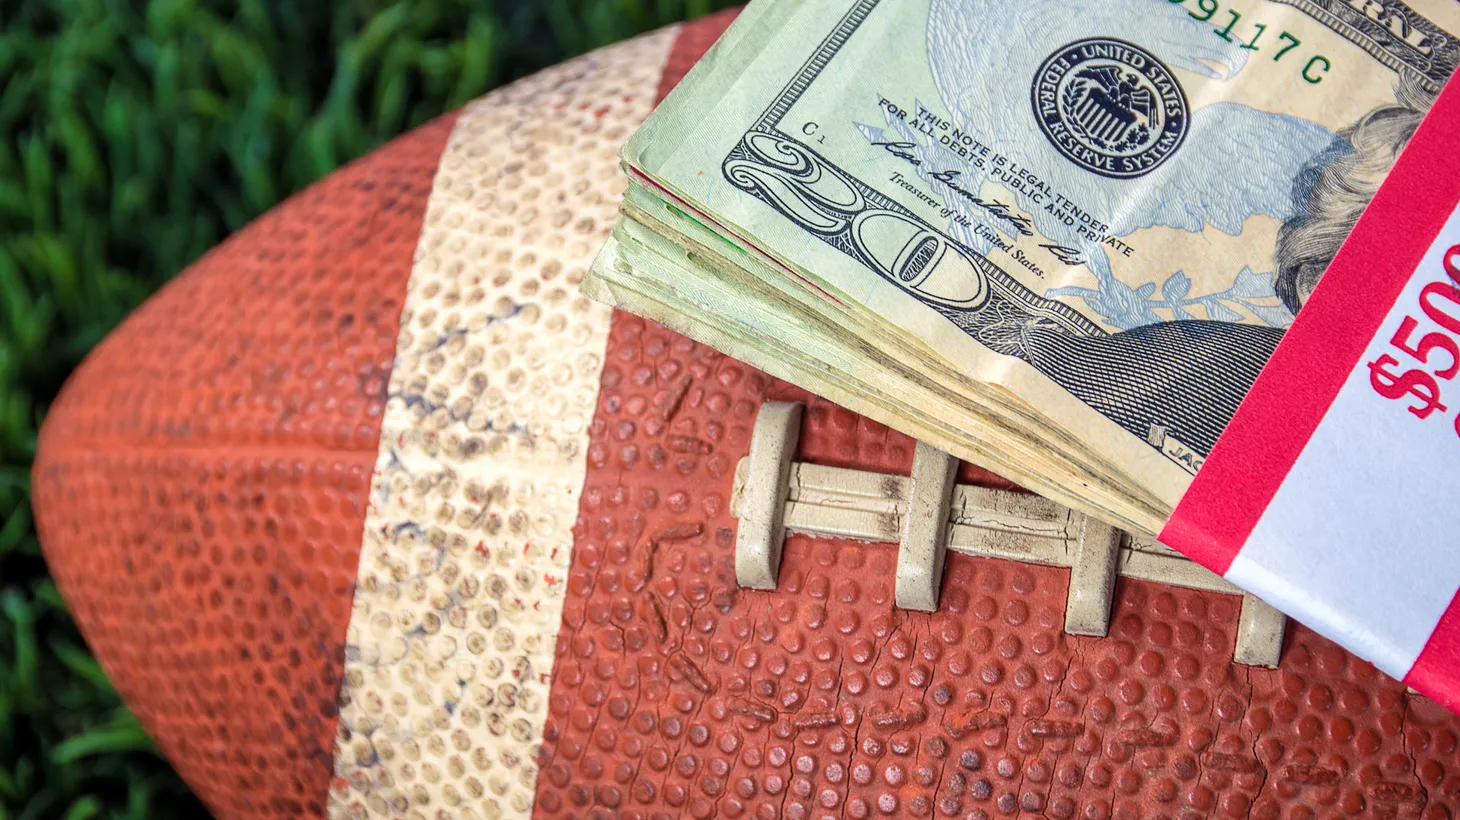 Sports betting might become legal in the state of California.